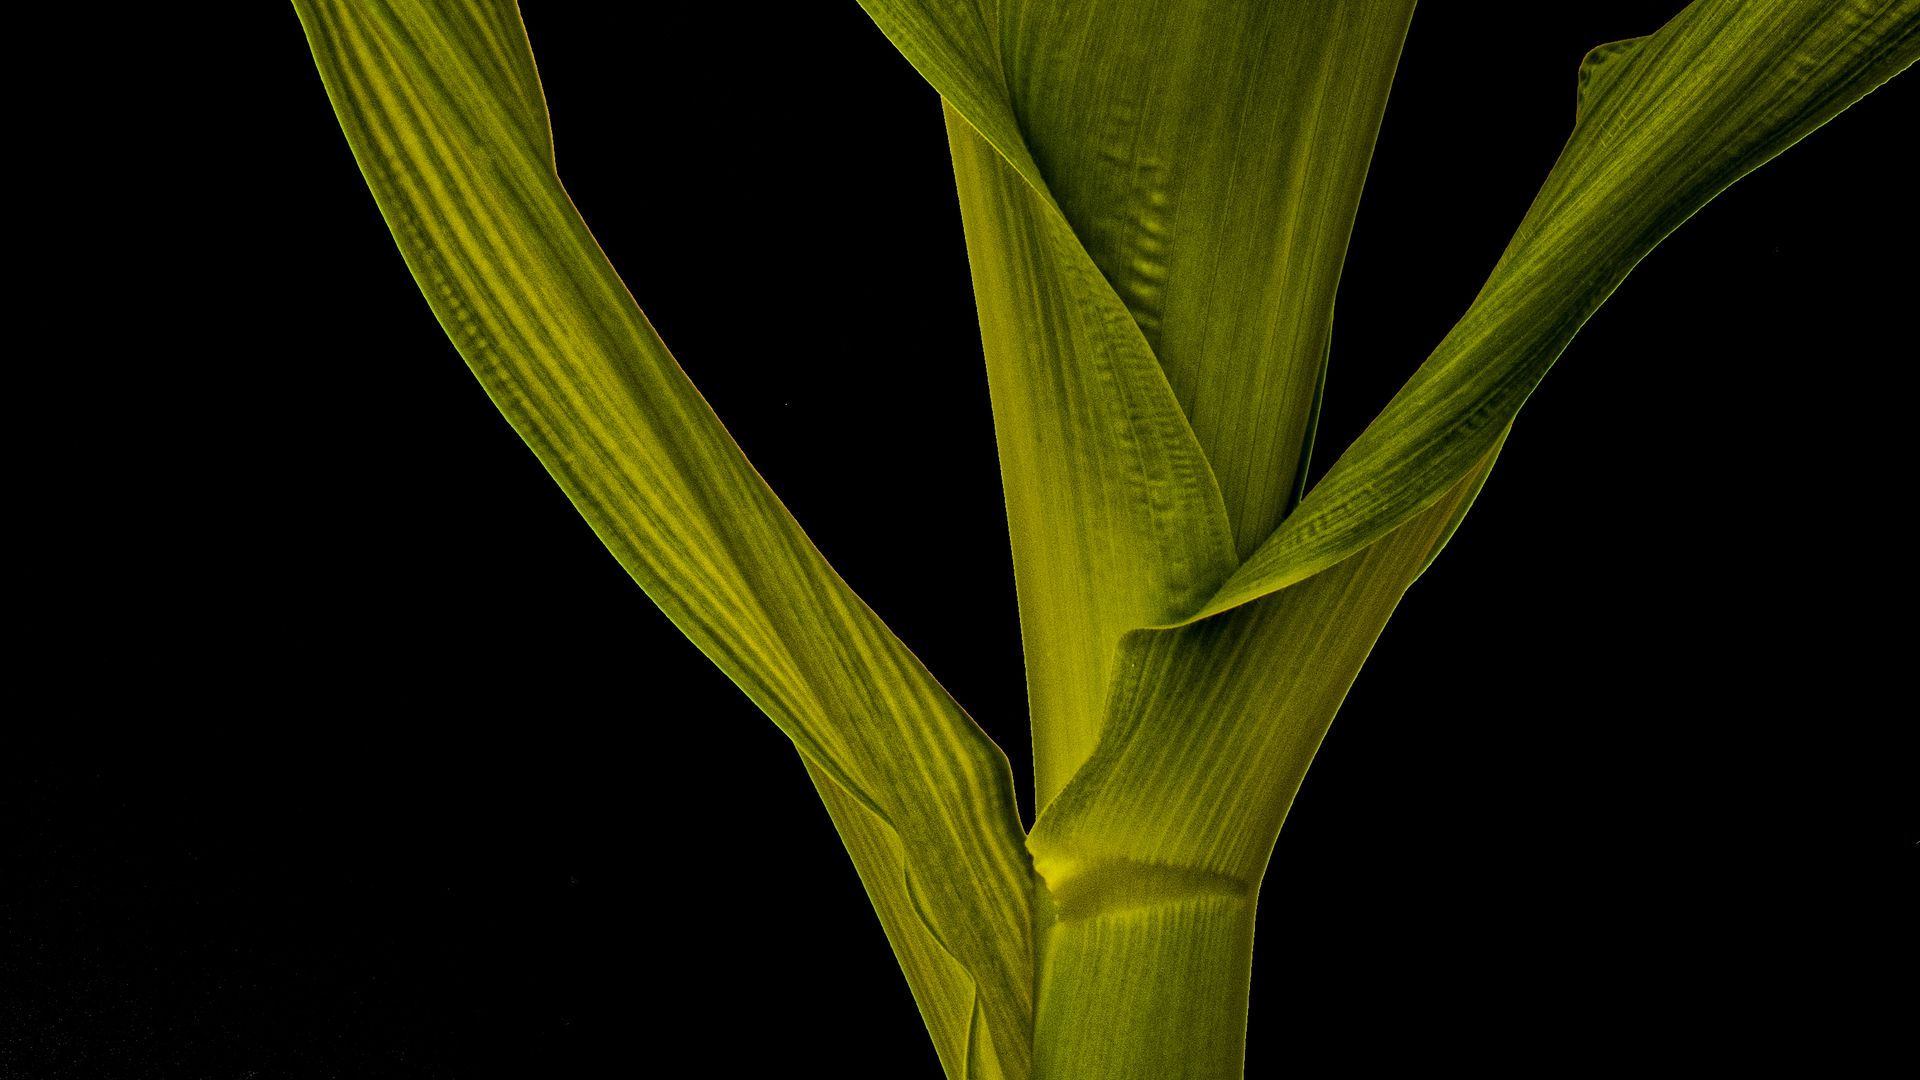 Photo of a developing maize plant